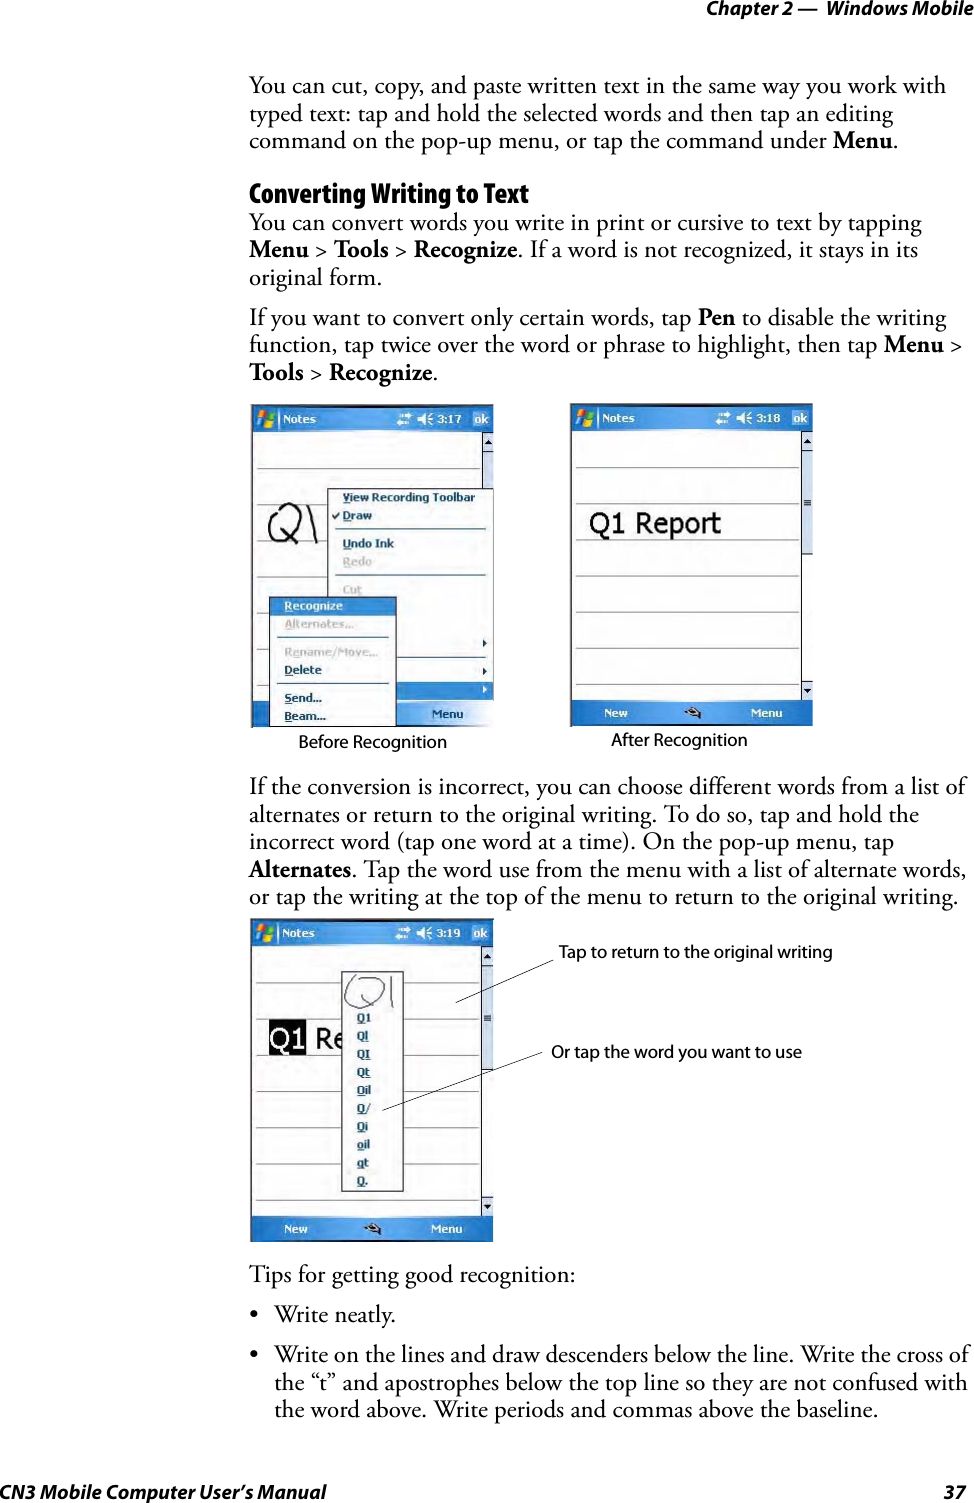 Chapter 2 —  Windows MobileCN3 Mobile Computer User’s Manual 37You can cut, copy, and paste written text in the same way you work with typed text: tap and hold the selected words and then tap an editing command on the pop-up menu, or tap the command under Menu.Converting Writing to TextYou can convert words you write in print or cursive to text by tapping Menu &gt; Tools &gt; Recognize. If a word is not recognized, it stays in its original form.If you want to convert only certain words, tap Pen to disable the writing function, tap twice over the word or phrase to highlight, then tap Menu &gt; Tools &gt; Recognize.If the conversion is incorrect, you can choose different words from a list of alternates or return to the original writing. To do so, tap and hold the incorrect word (tap one word at a time). On the pop-up menu, tap Alternates. Tap the word use from the menu with a list of alternate words, or tap the writing at the top of the menu to return to the original writing.Tips for getting good recognition:• Write neatly.• Write on the lines and draw descenders below the line. Write the cross of the “t” and apostrophes below the top line so they are not confused with the word above. Write periods and commas above the baseline.Before Recognition After RecognitionTap to return to the original writingOr tap the word you want to use